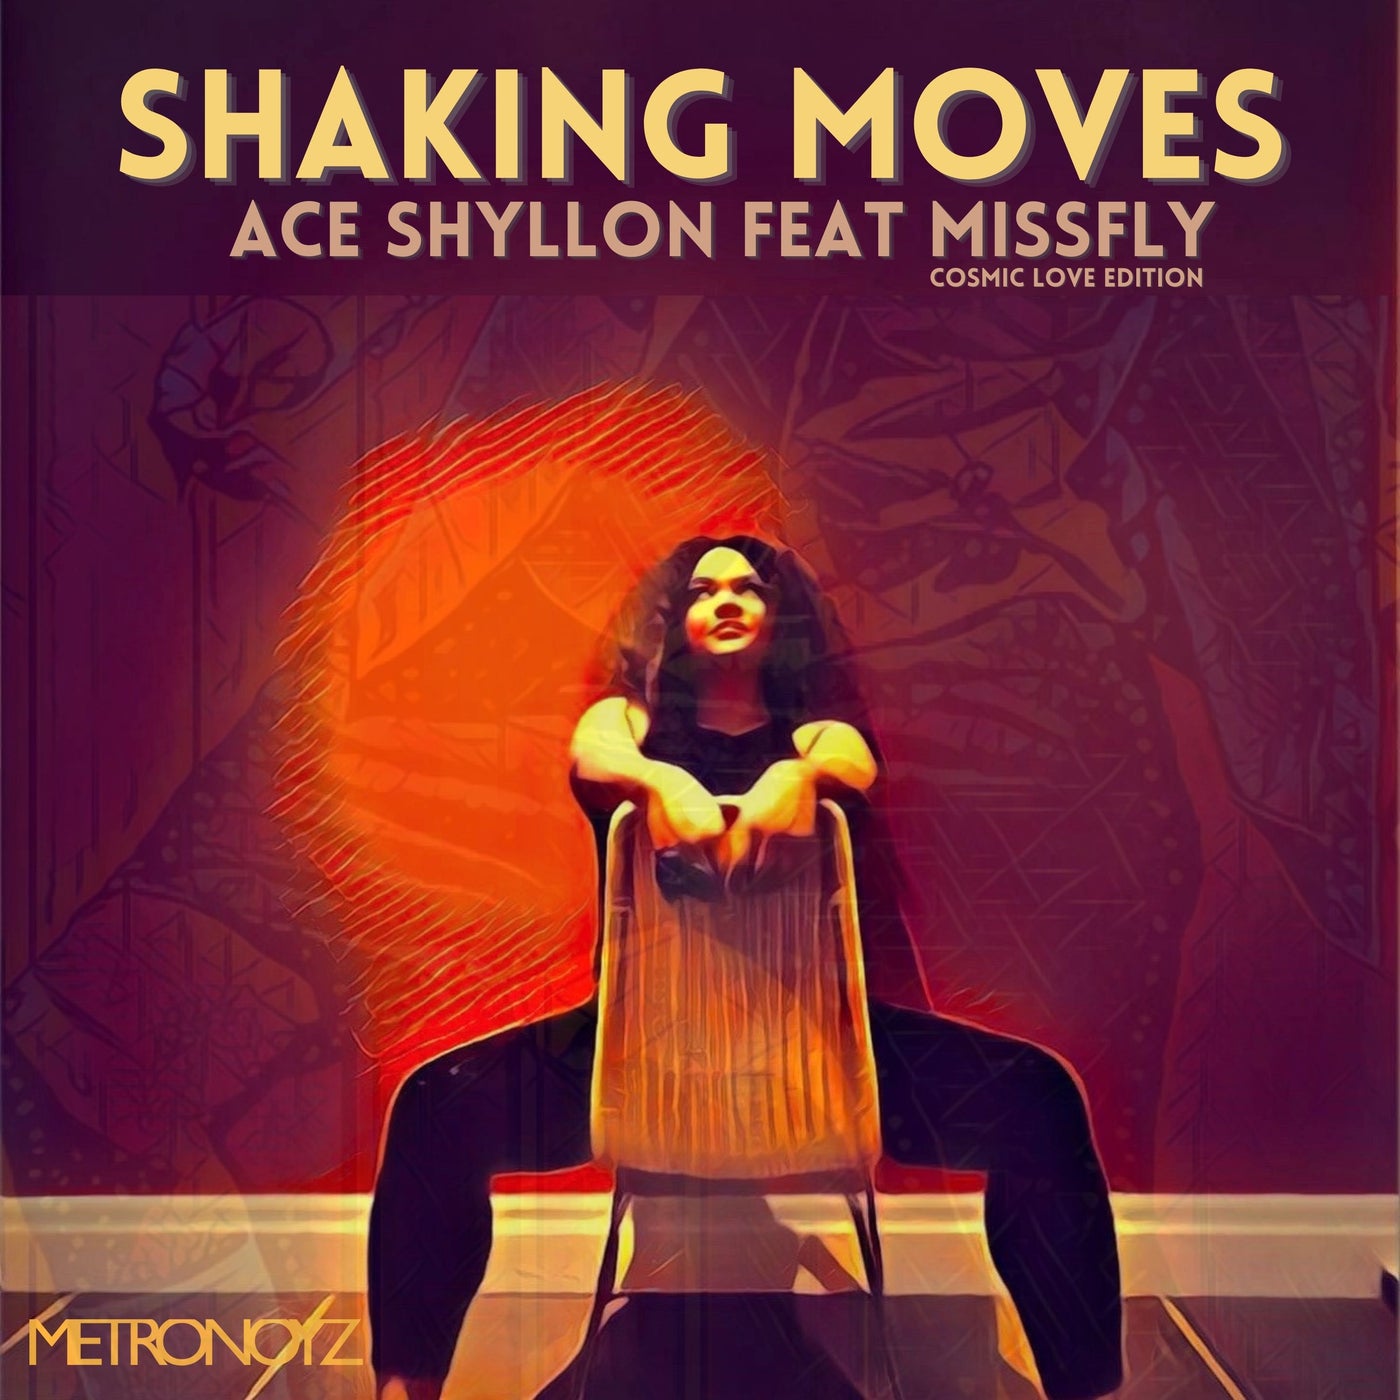 Shaking Moves (Cosmic Love Edition)